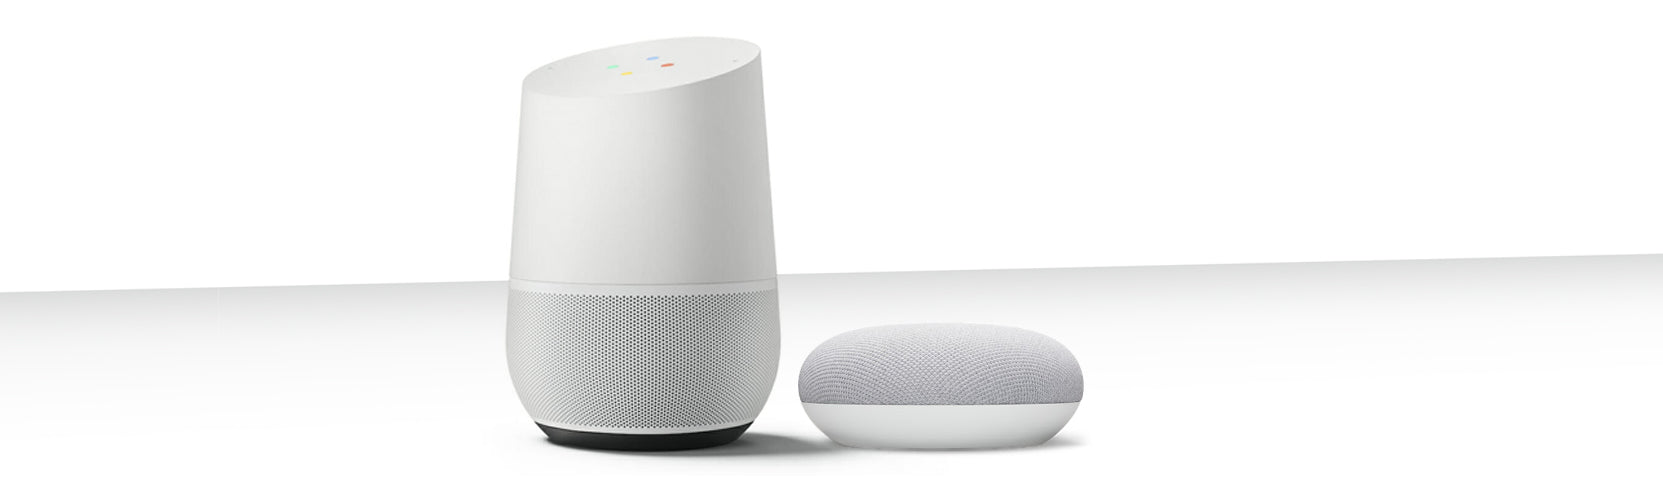 What's the Difference Between Google Home and Google Home Mini?